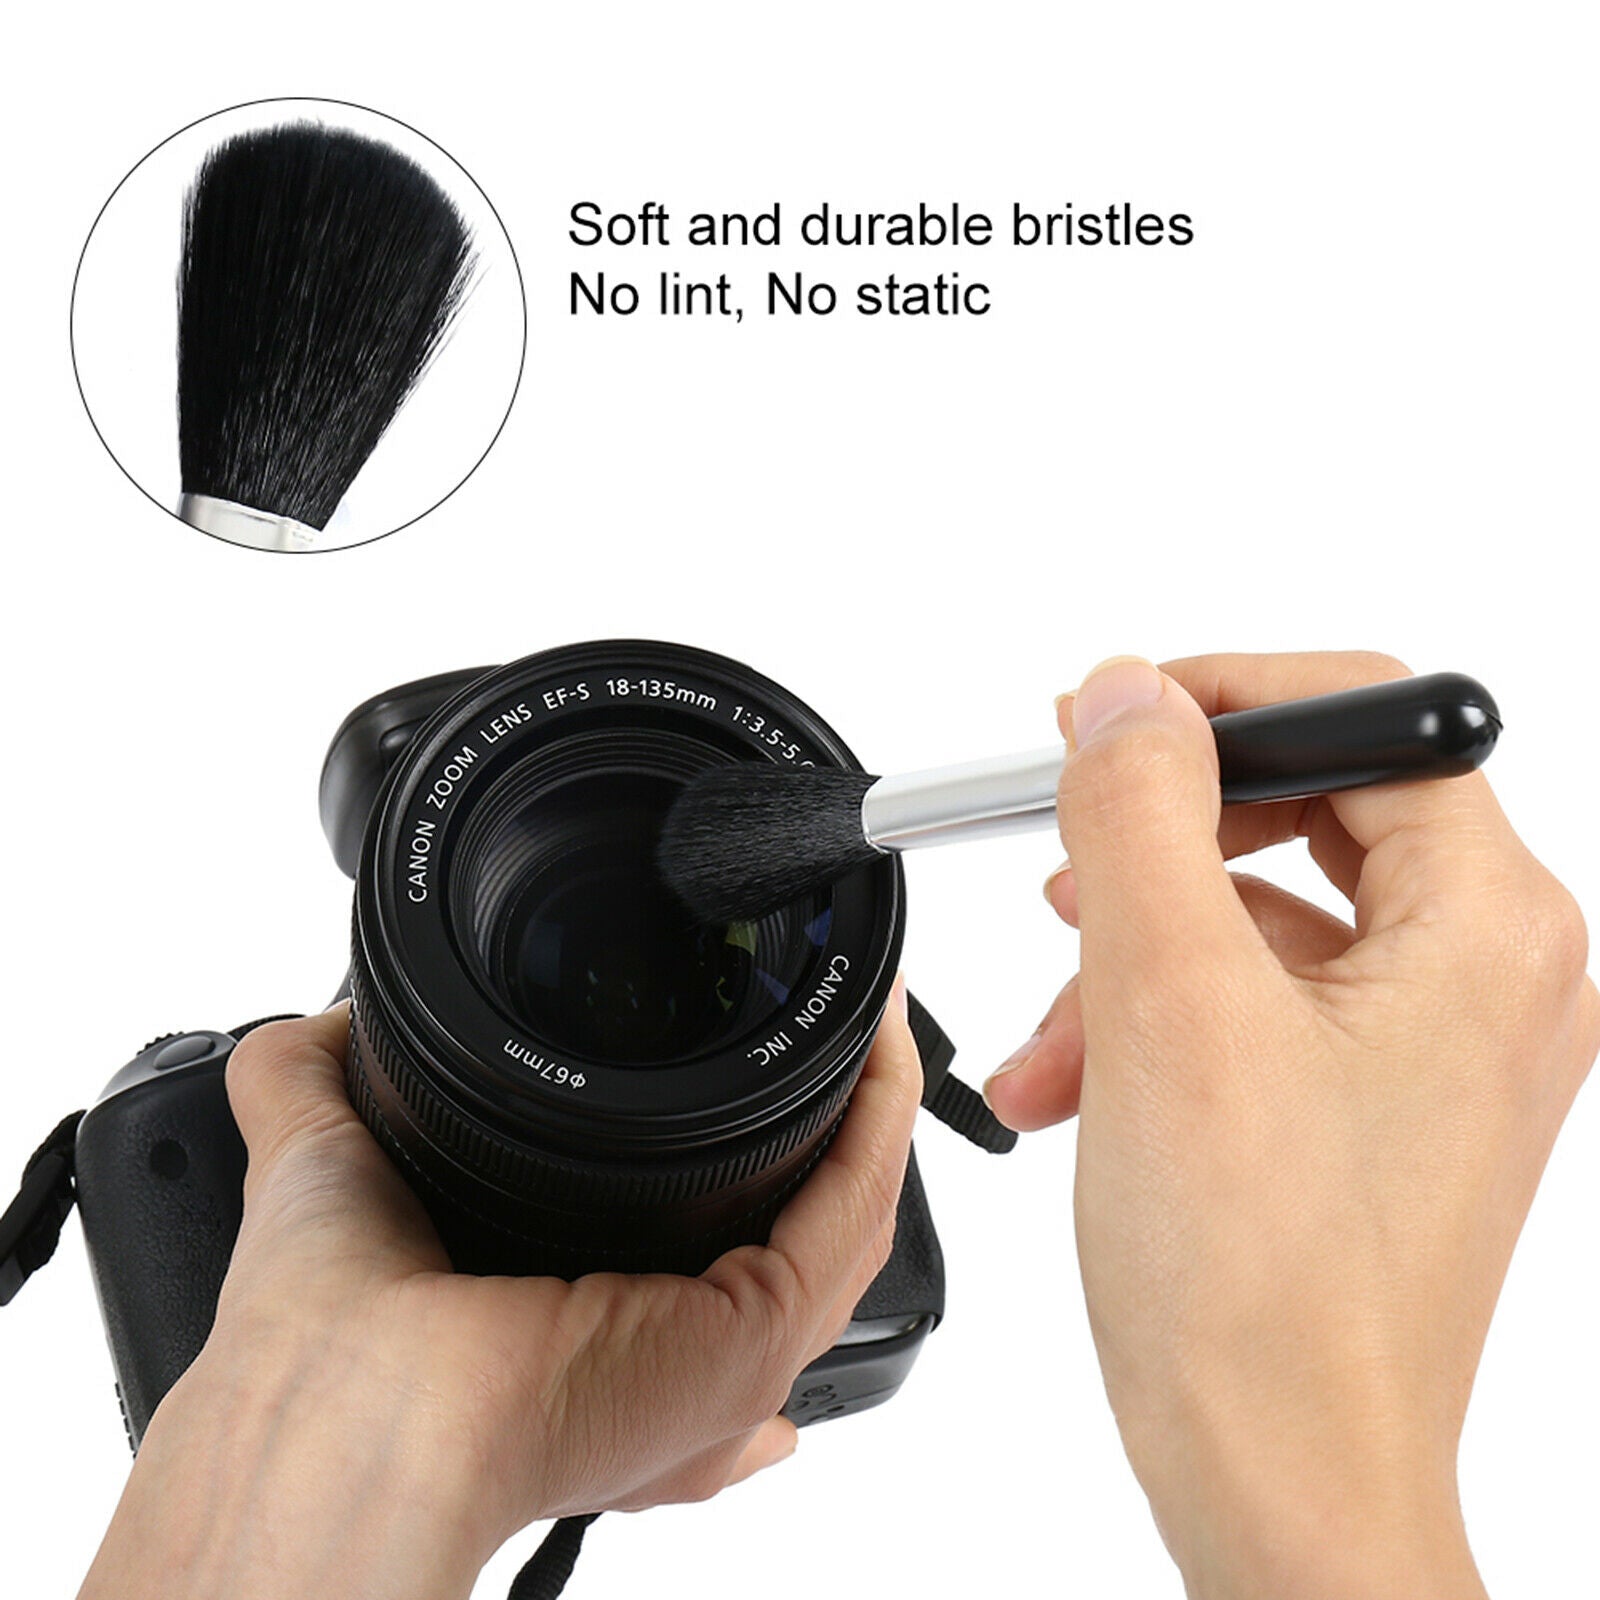 Professional camera & lens cleaning kit for most DSLRs